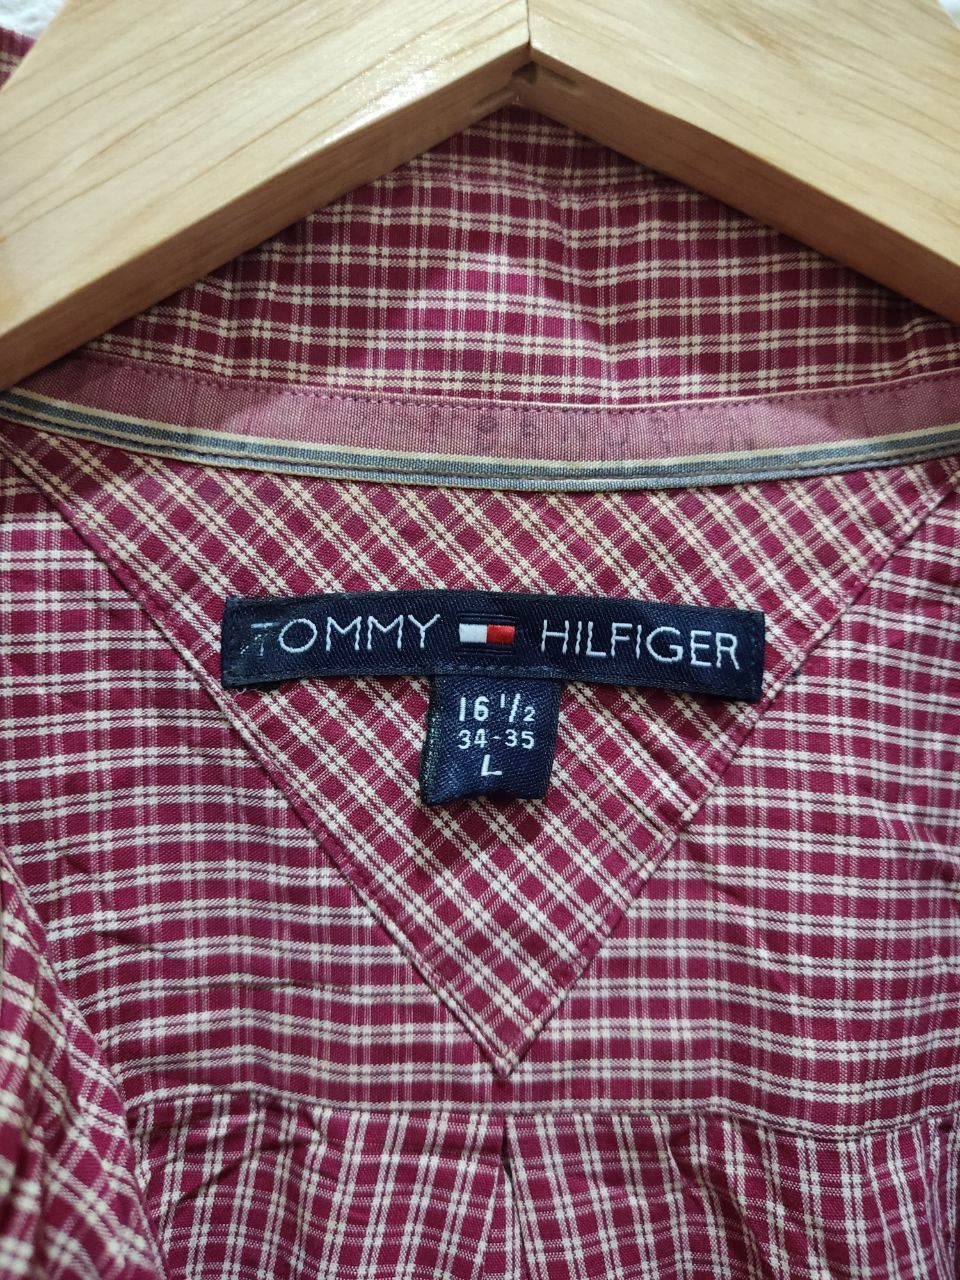 Tommy Hilfiger Red Plaid Checked Oversized Long Sleeve Shirt - 7